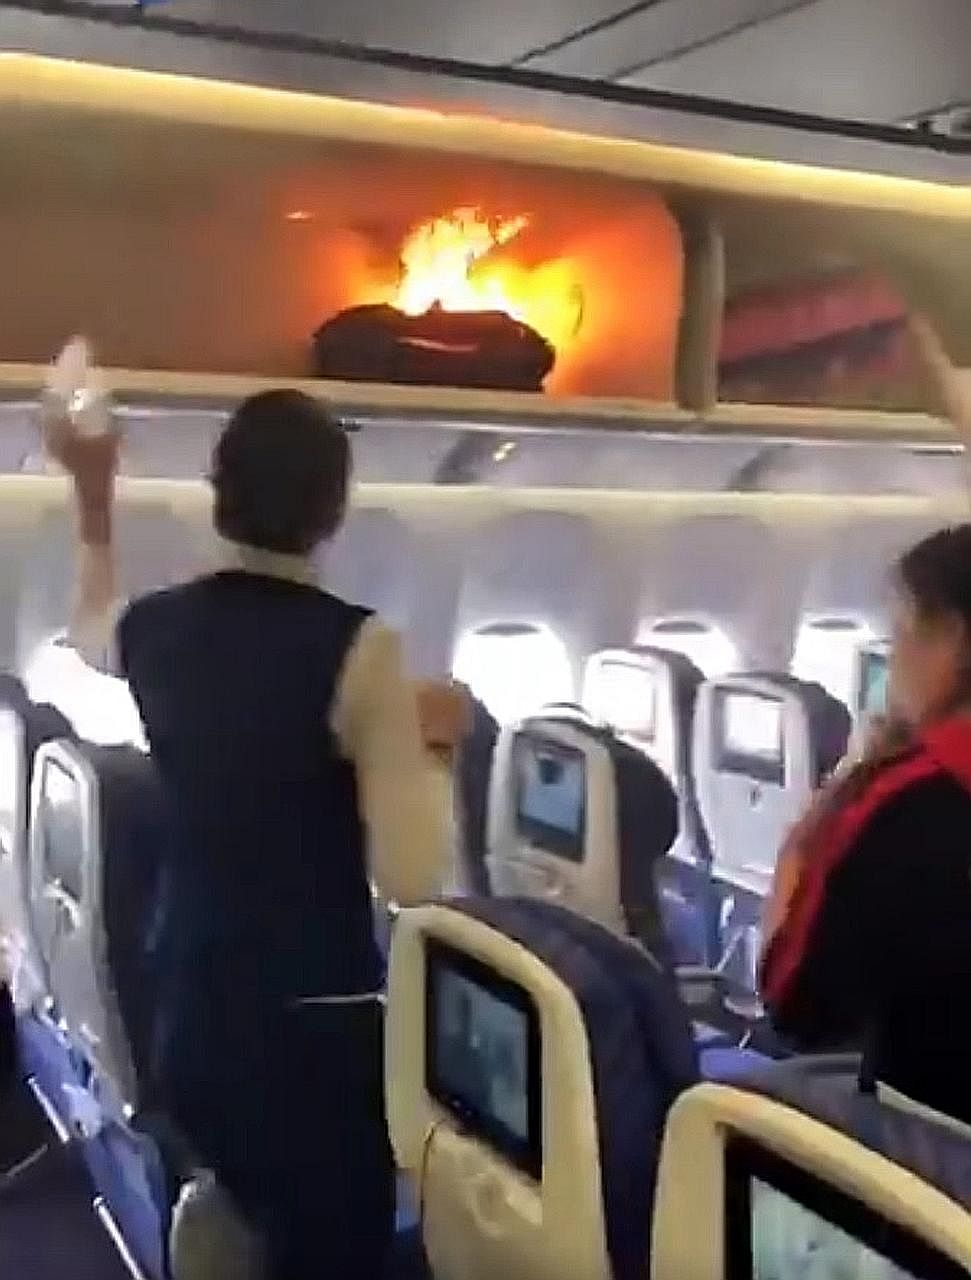 A flight attendant trying to douse the flames from a passenger's cabin bag. The incident on the China Southern Airlines plane took place as passengers were boarding in Guangzhou.